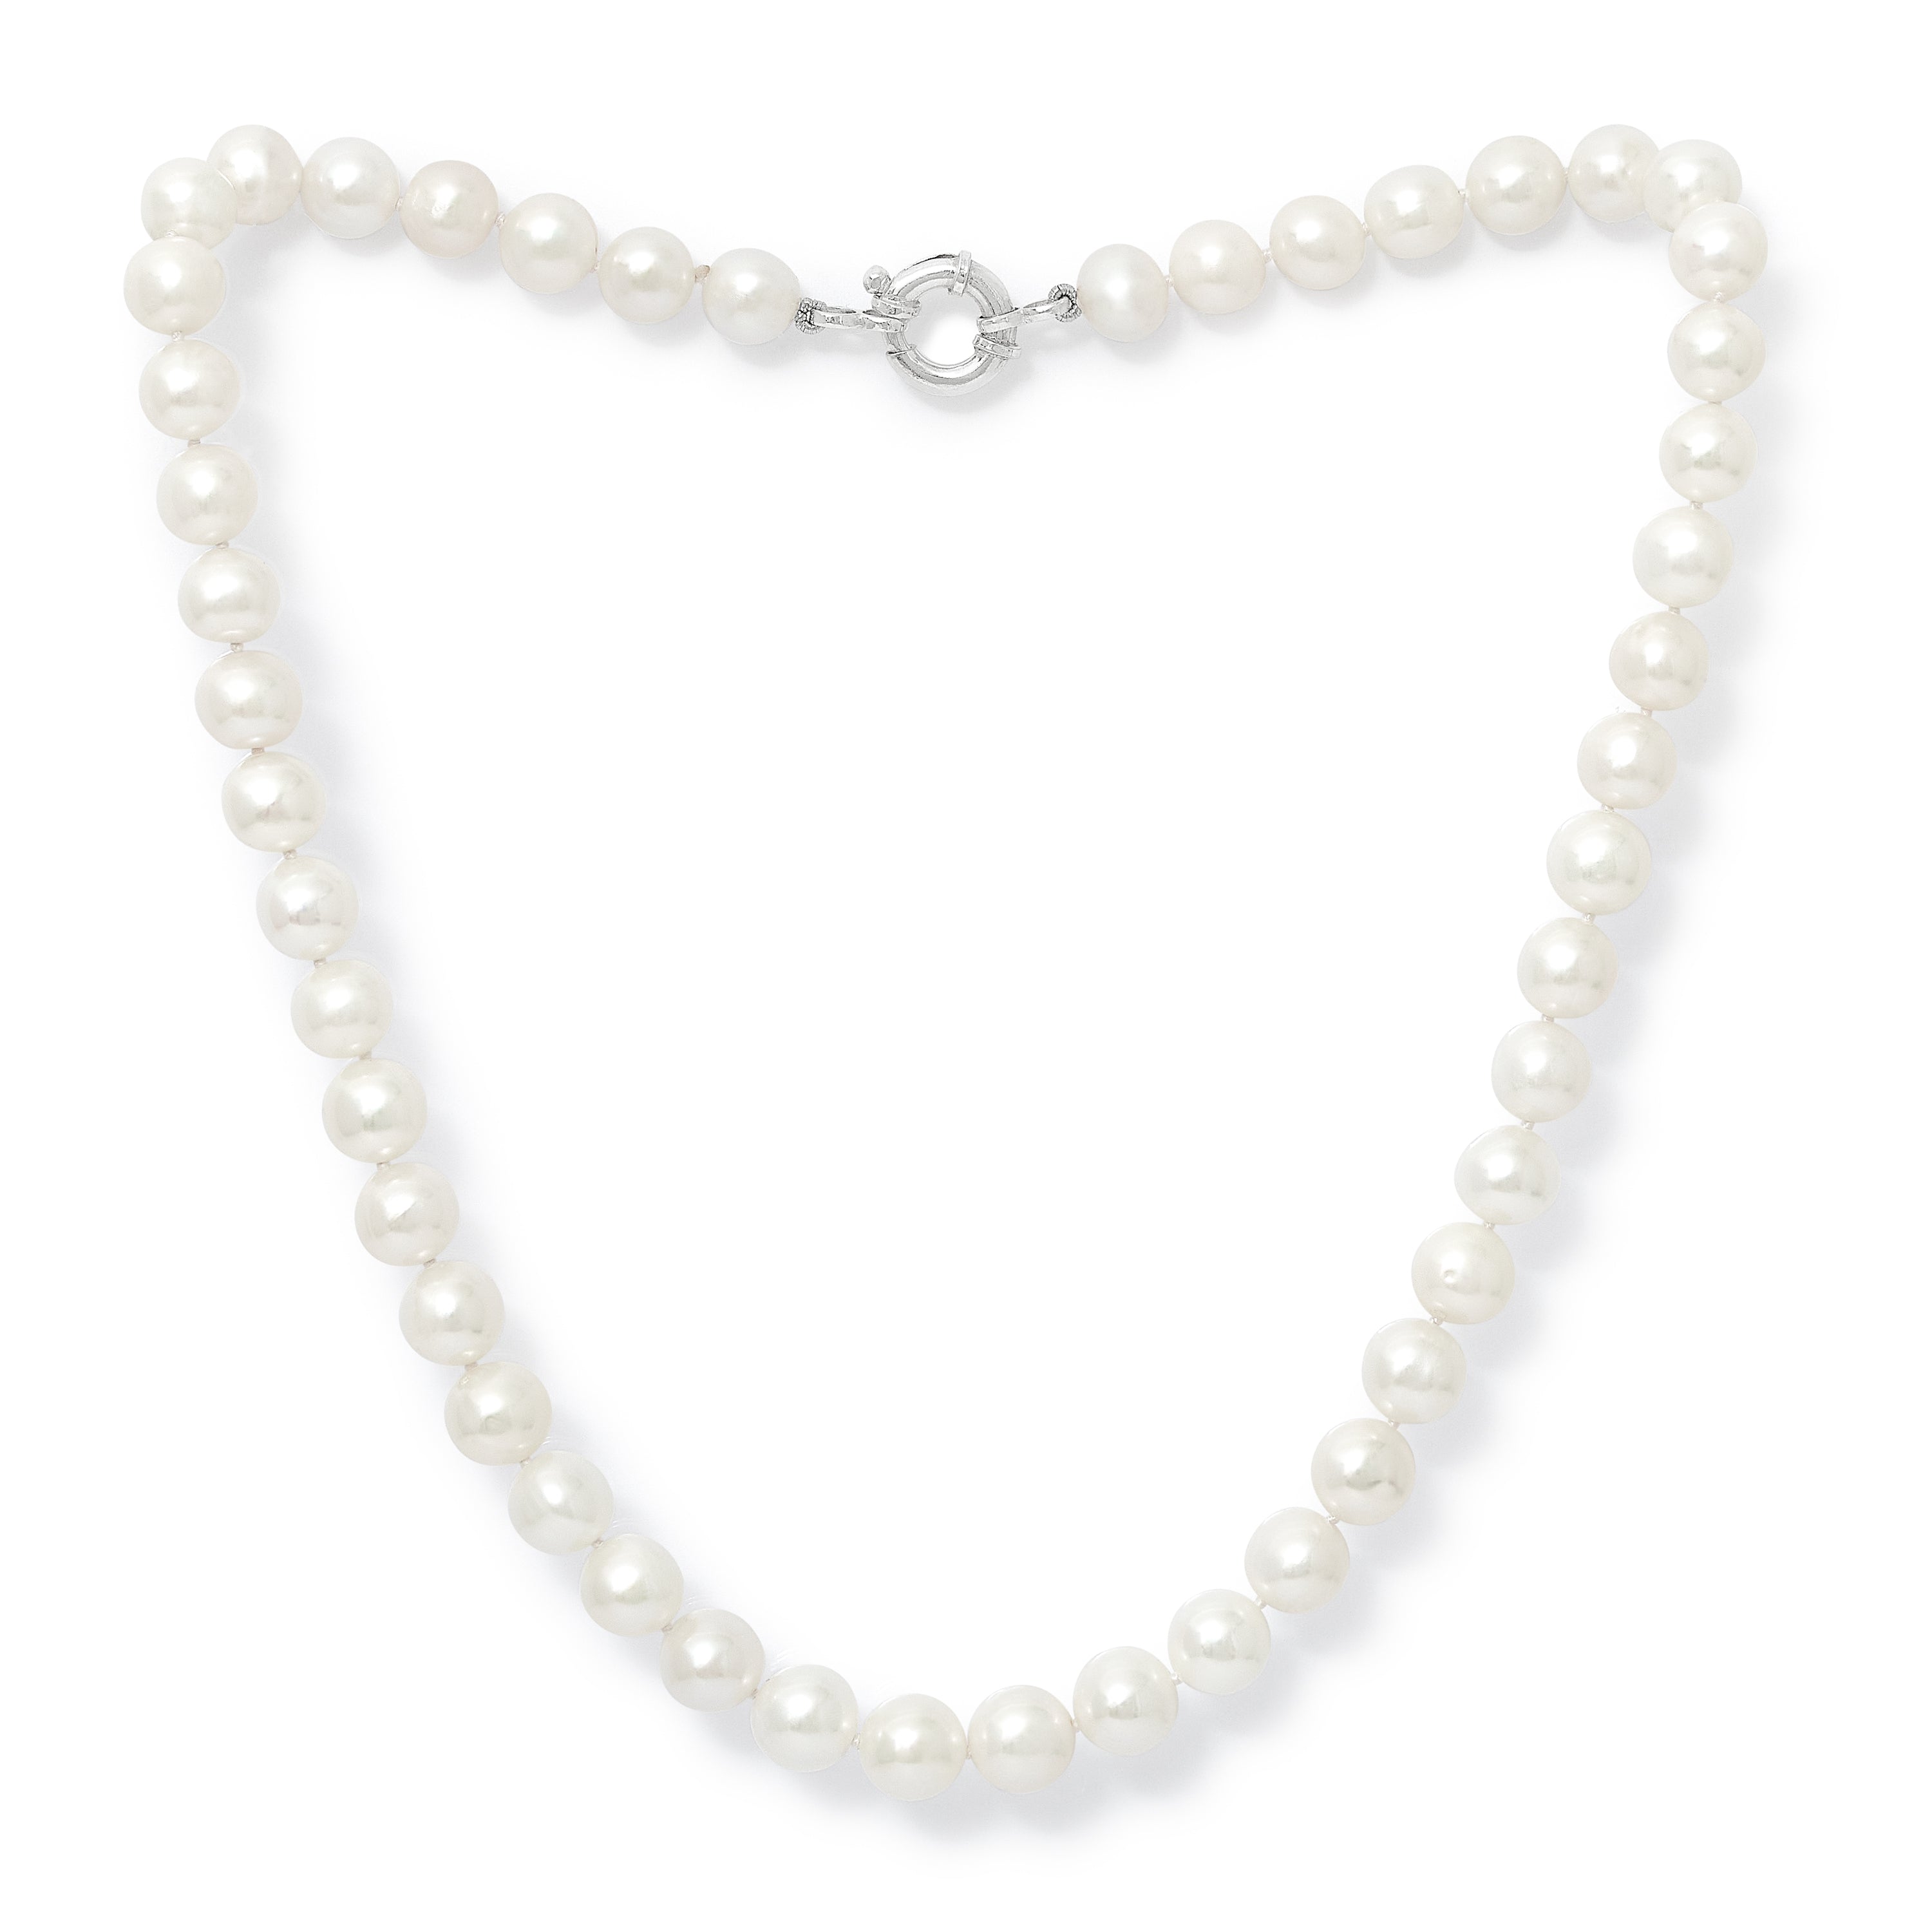 Women’s Gratia White Cultured Freshwater Pearl Necklace With Sterling Silver Spring Clasp Pearls of the Orient Online